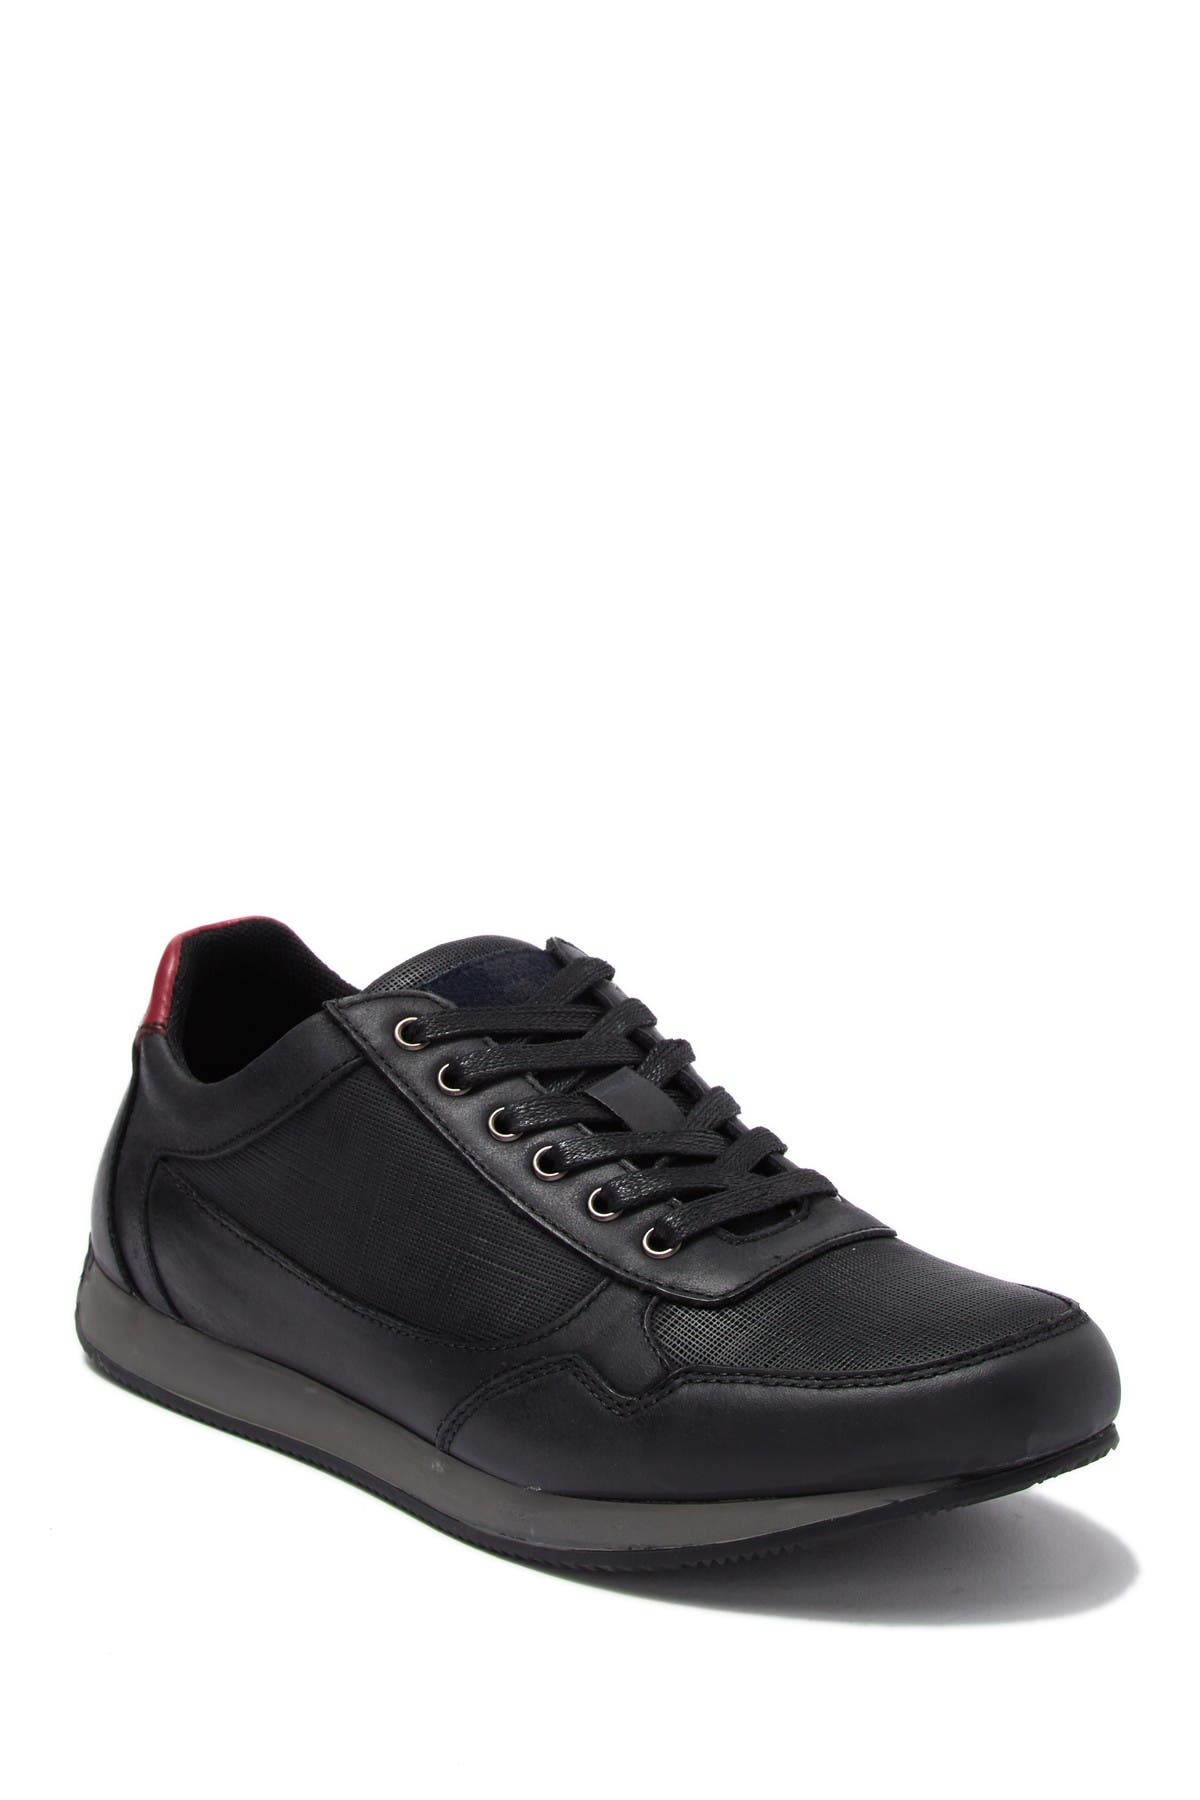 English Laundry | Bradley Lace-Up Sneaker | Nordstrom Rack